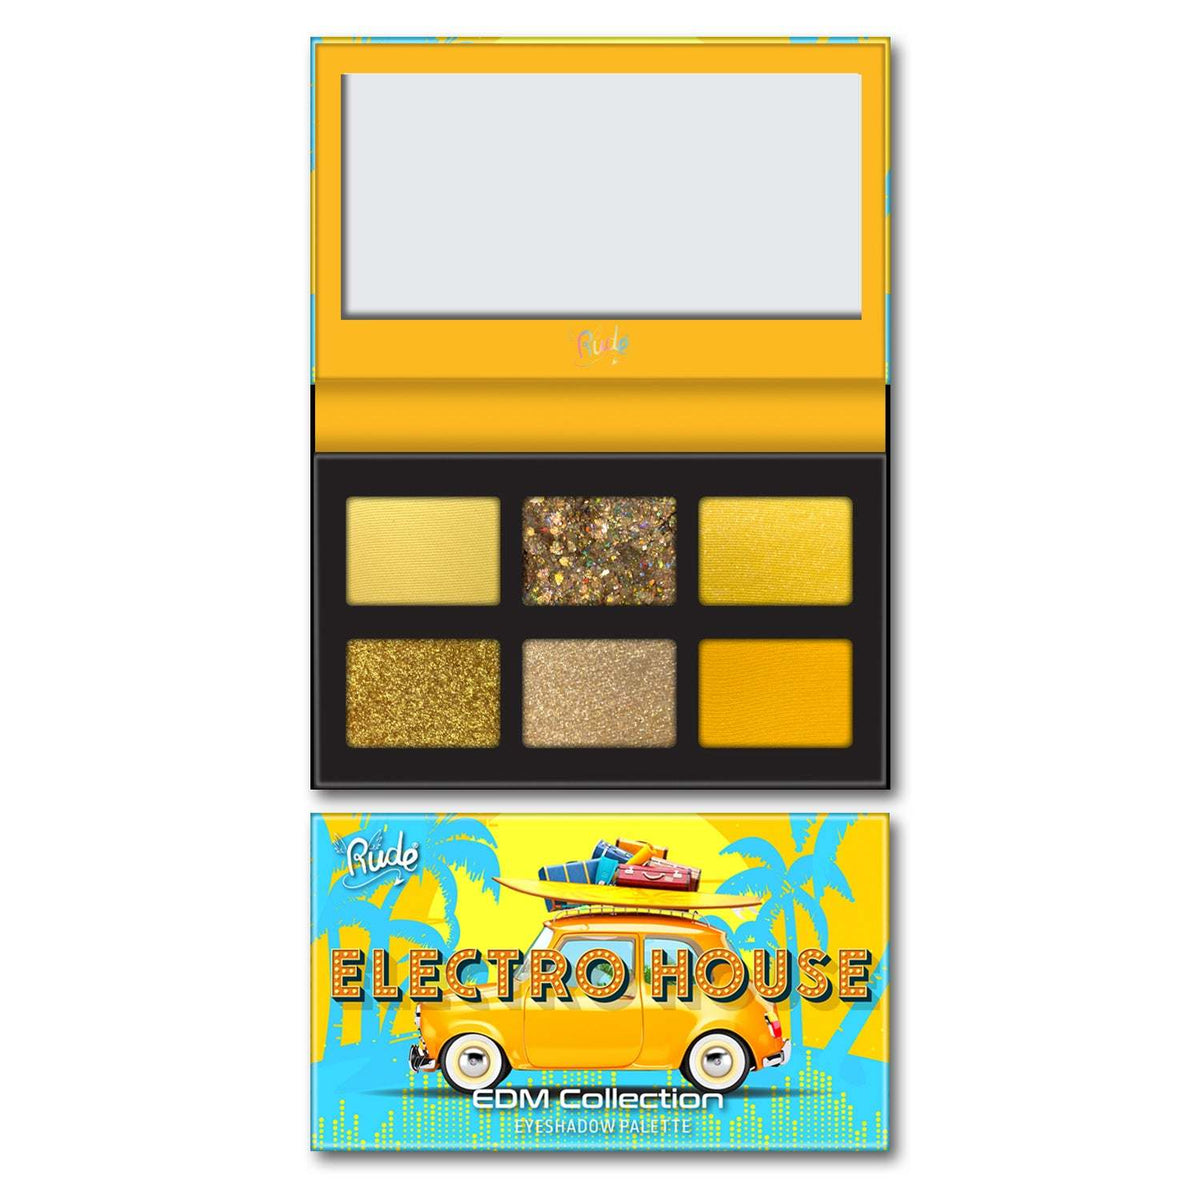 RUDE EDM Collection Eyeshadow Palette - Premium Eye Shadow Palette from Doba - Just $15.24! Shop now at Ida Louise Boutique